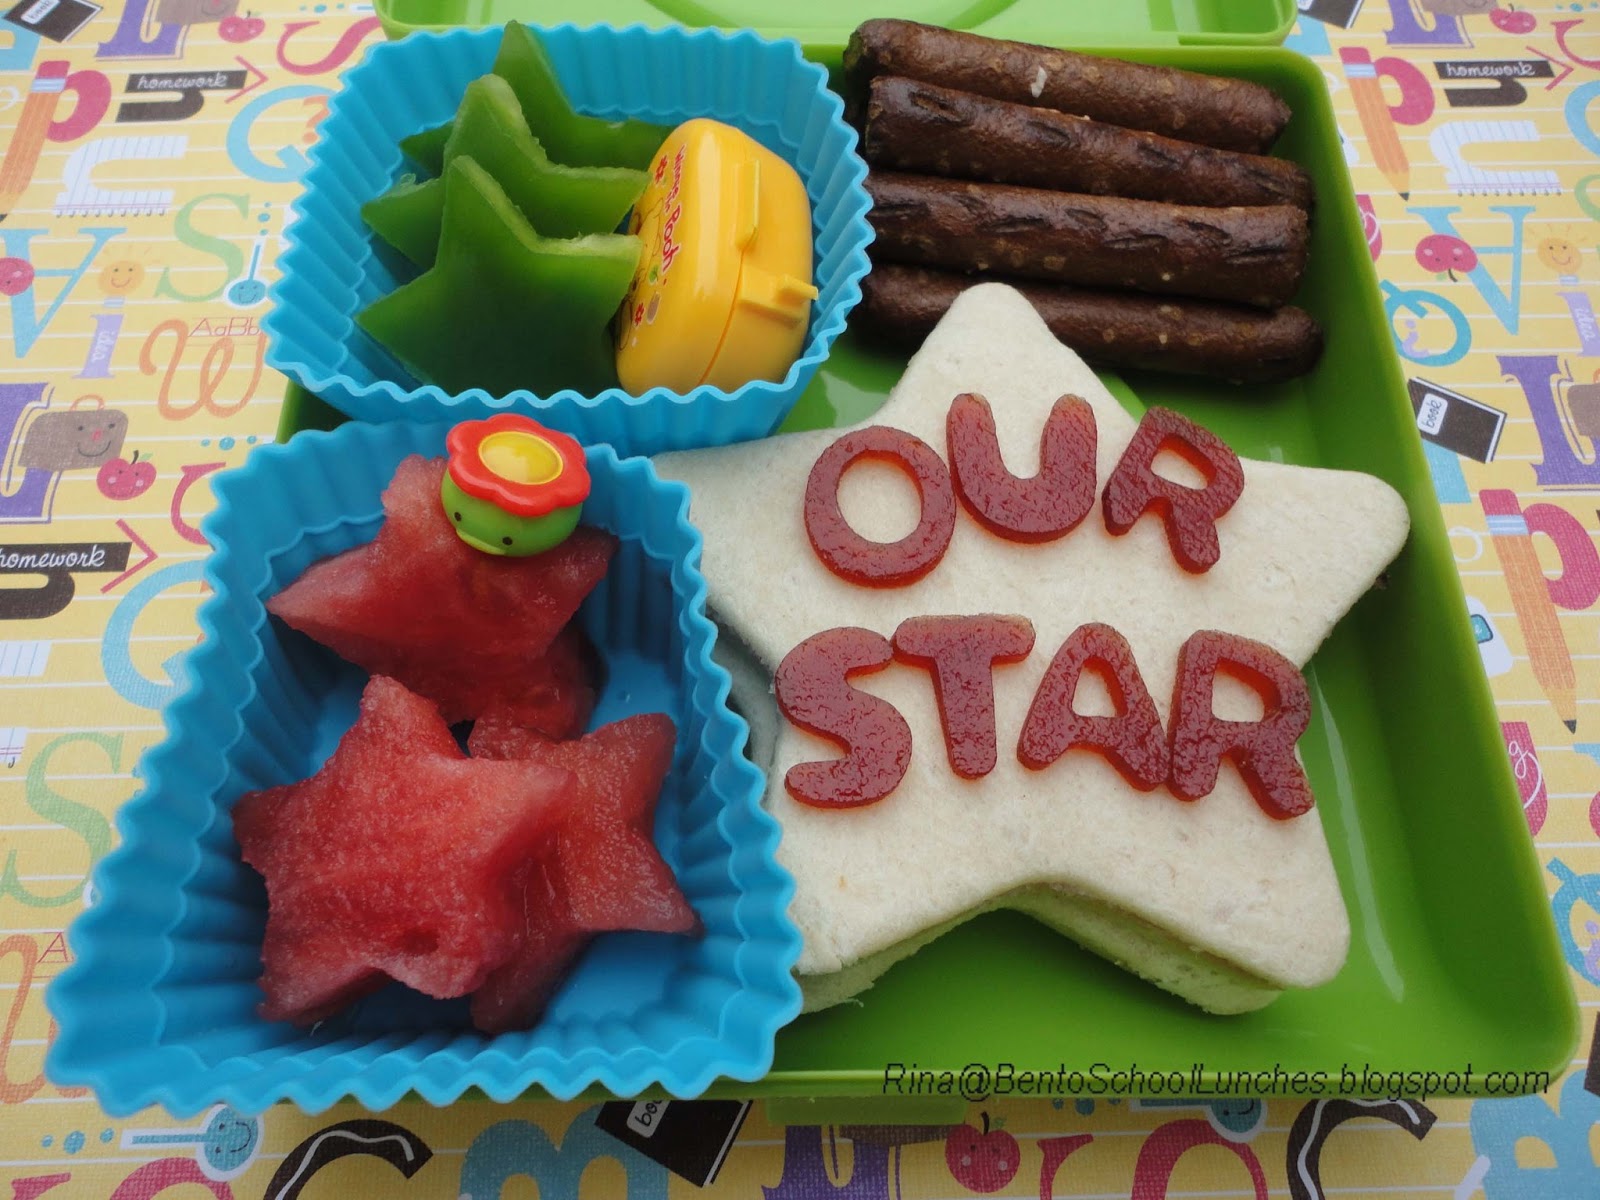 Bento School Lunches : Bento Lunch: Star Bento For Our Star